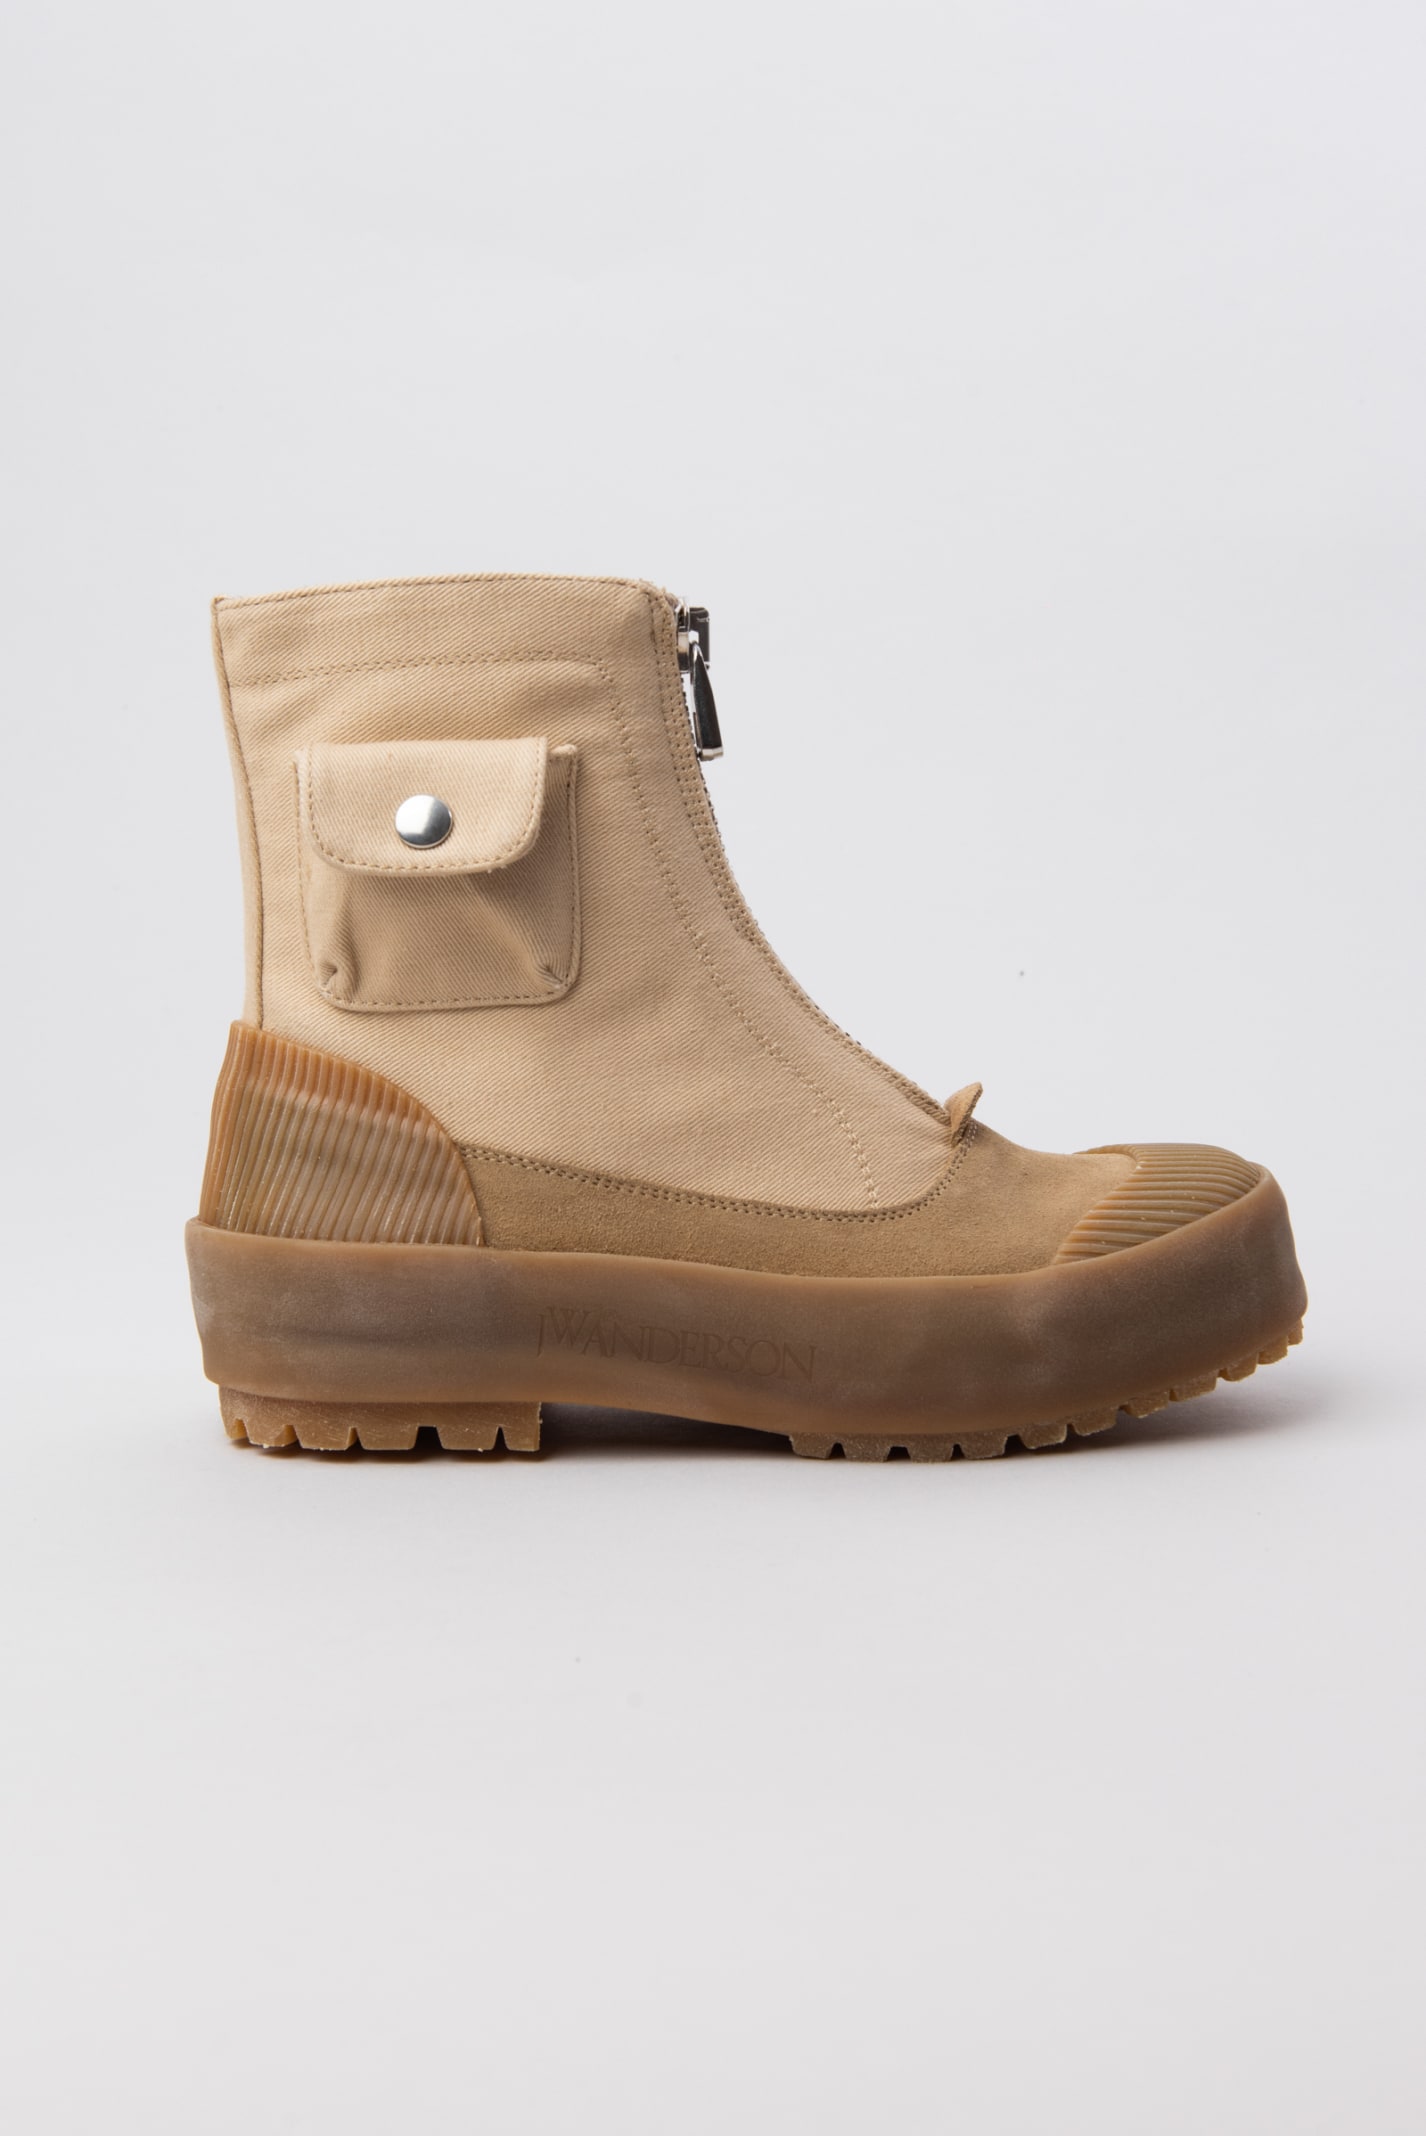 JW ANDERSON DUCK BOOT,11882406